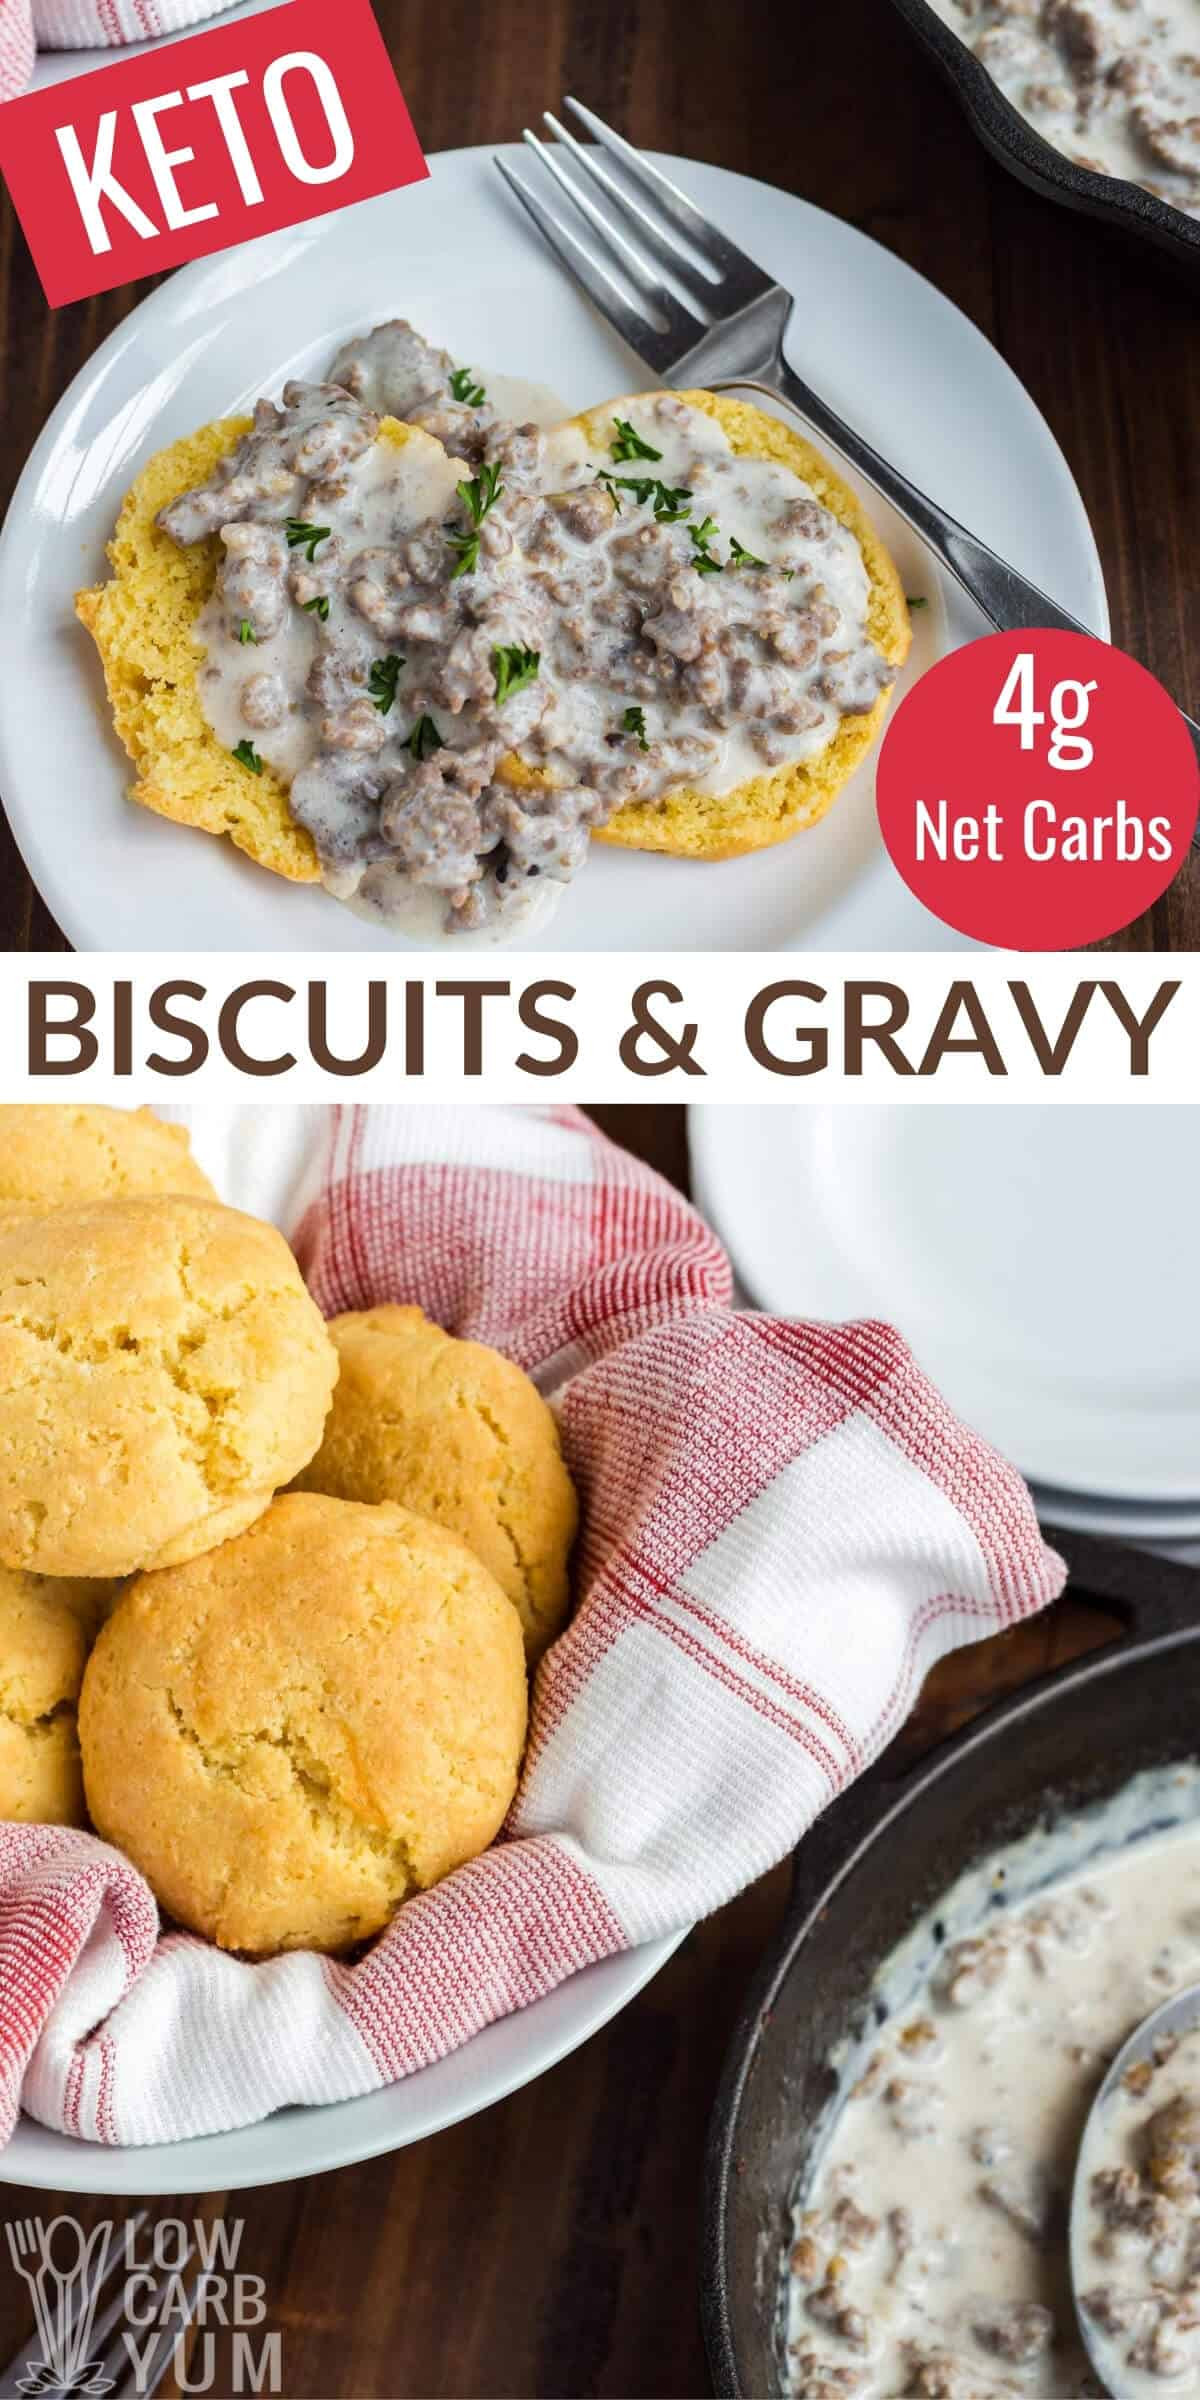 Keto Biscuits And Gravy
 Keto Biscuits and Gravy For Low Carb Breakfast